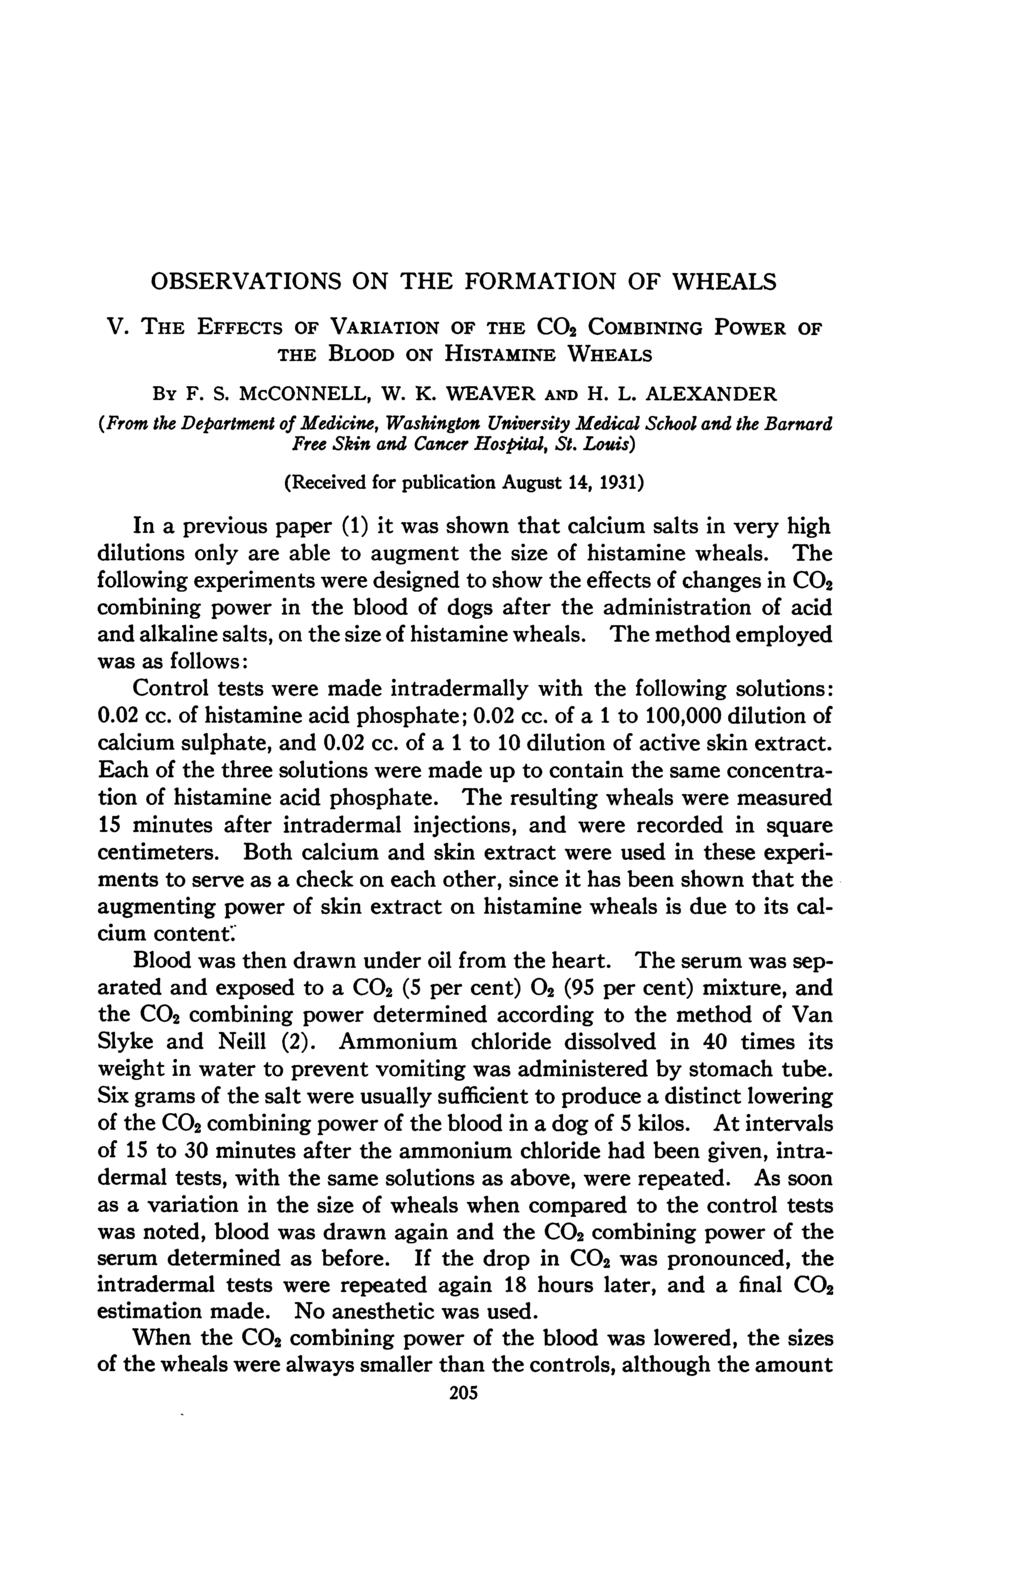 OBSERVATIONS ON THE FORMATION OF WHEALS V. THE EFFECTS OF VARIATION OF THE CO2 COMBINING POWER OF THE BLOOD ON HISTAMINE WHEALS By F. S. McCONNELL, W. K. WEAVER AND H. L.